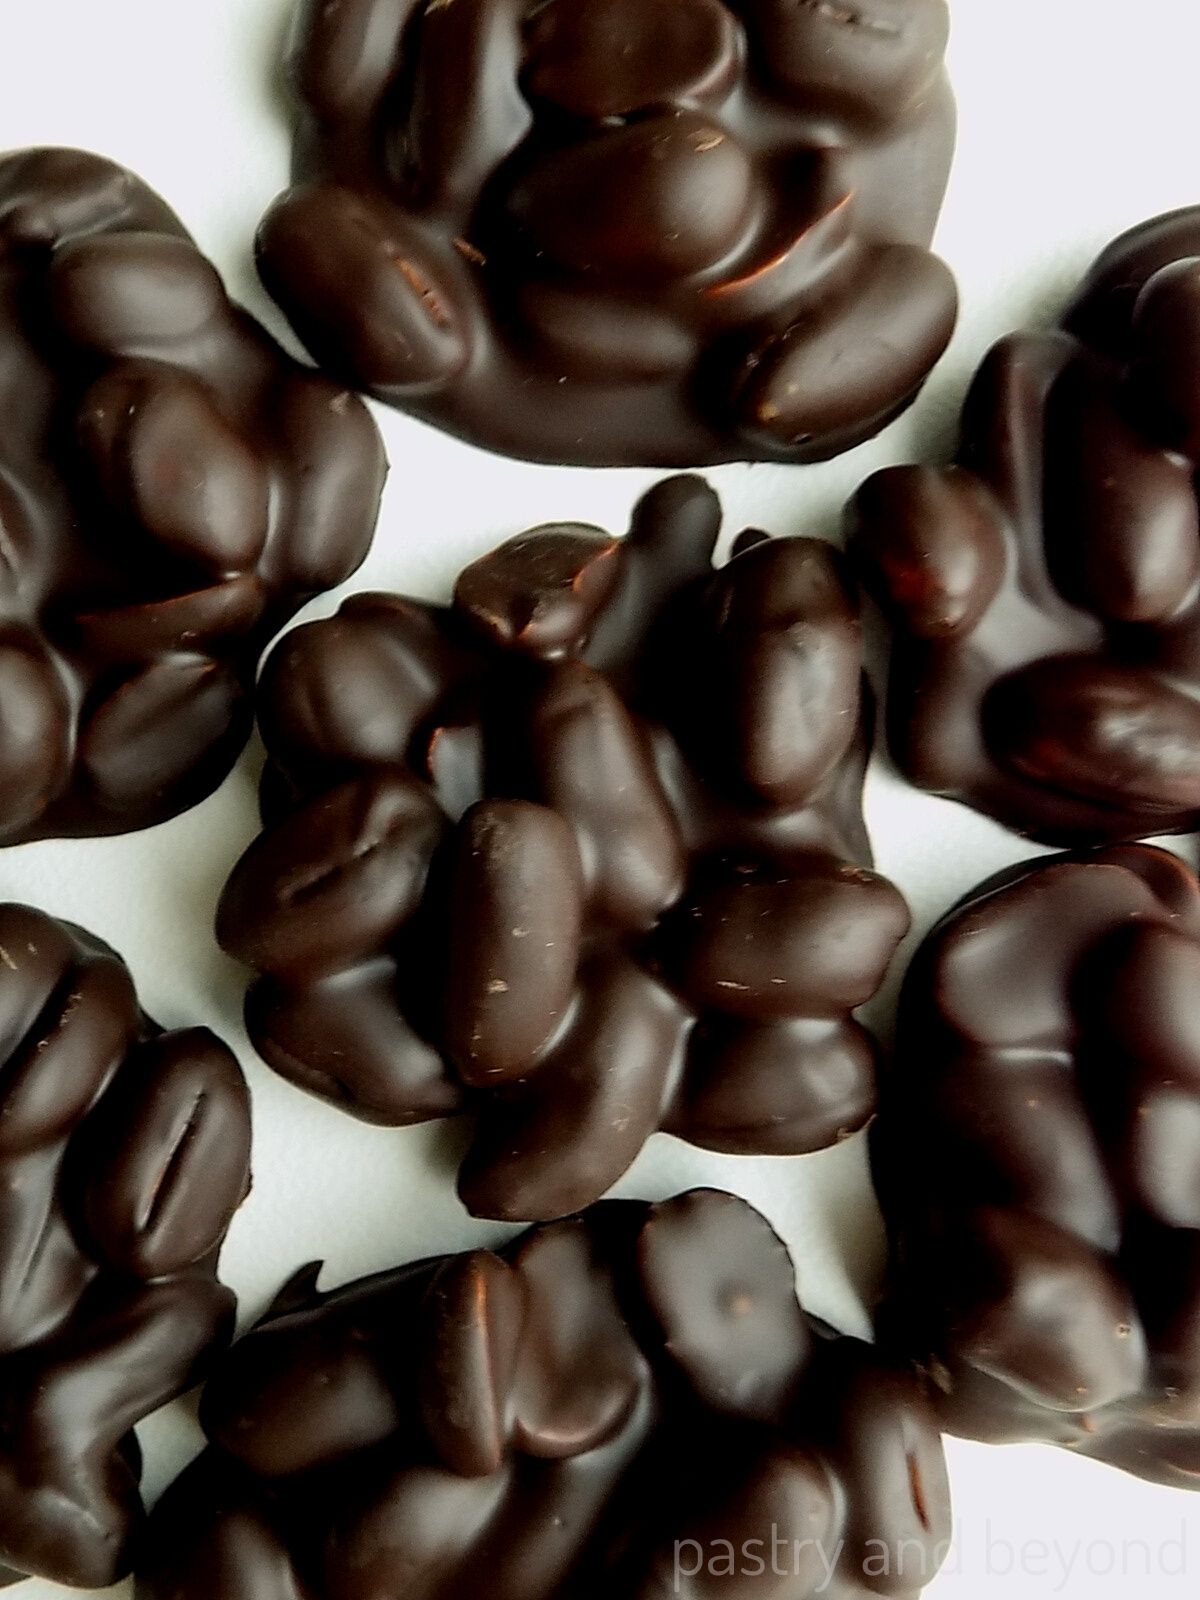 Chocolate peanut clusters on a white surface.